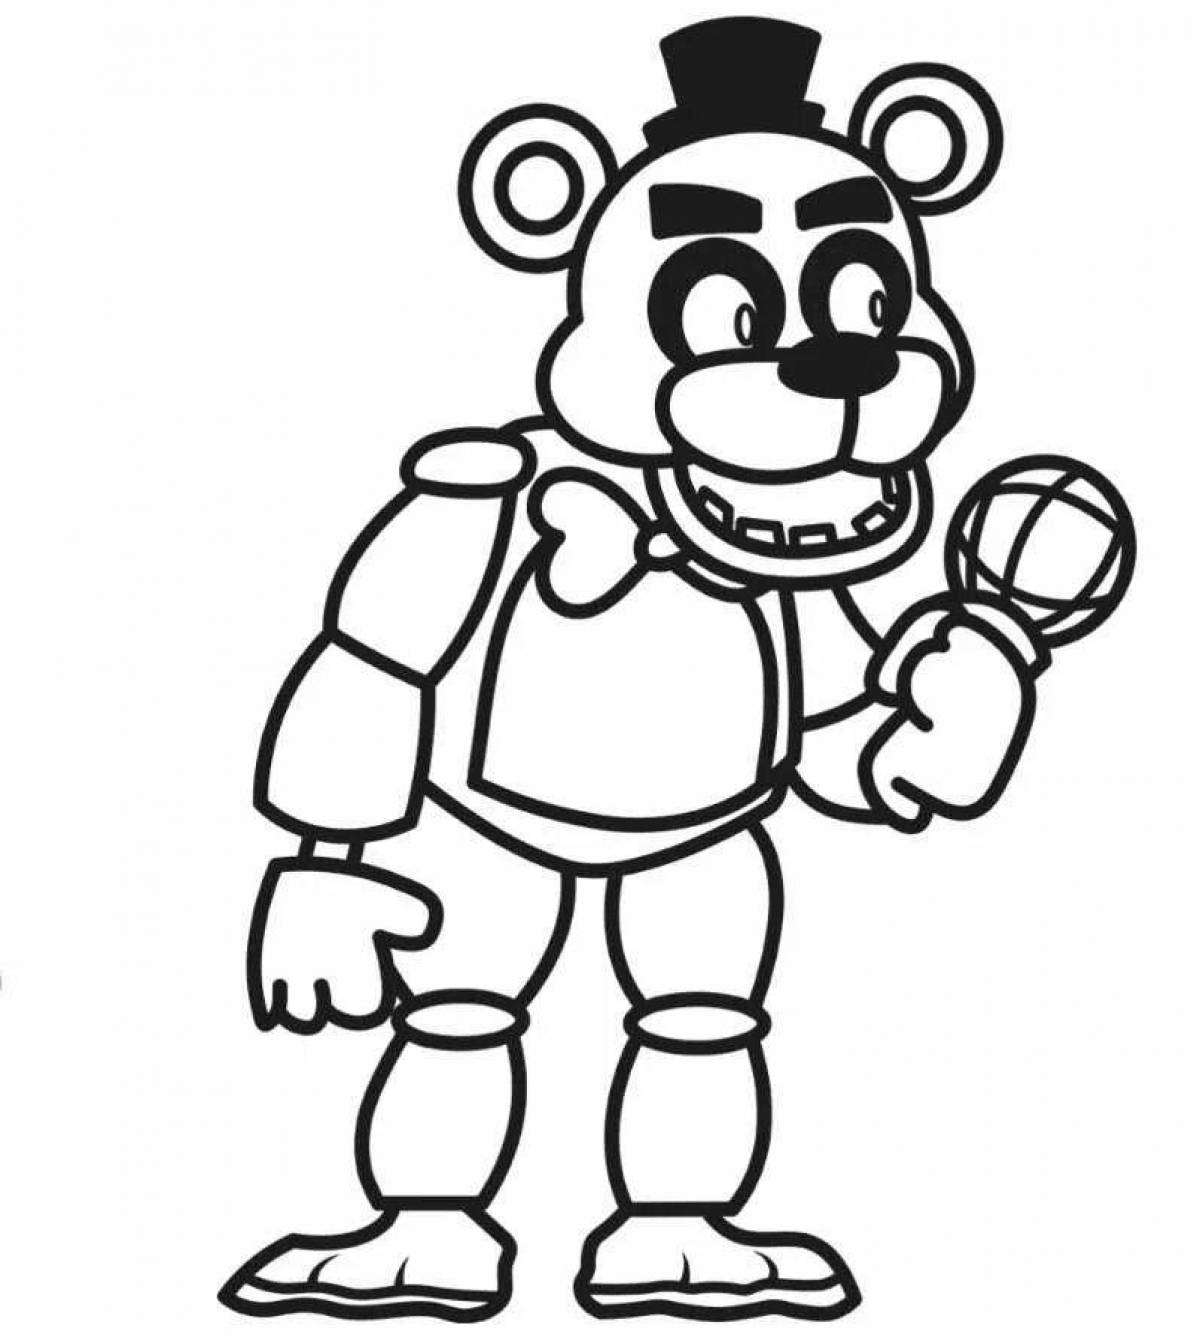 Engaging fnaf security breach coloring page